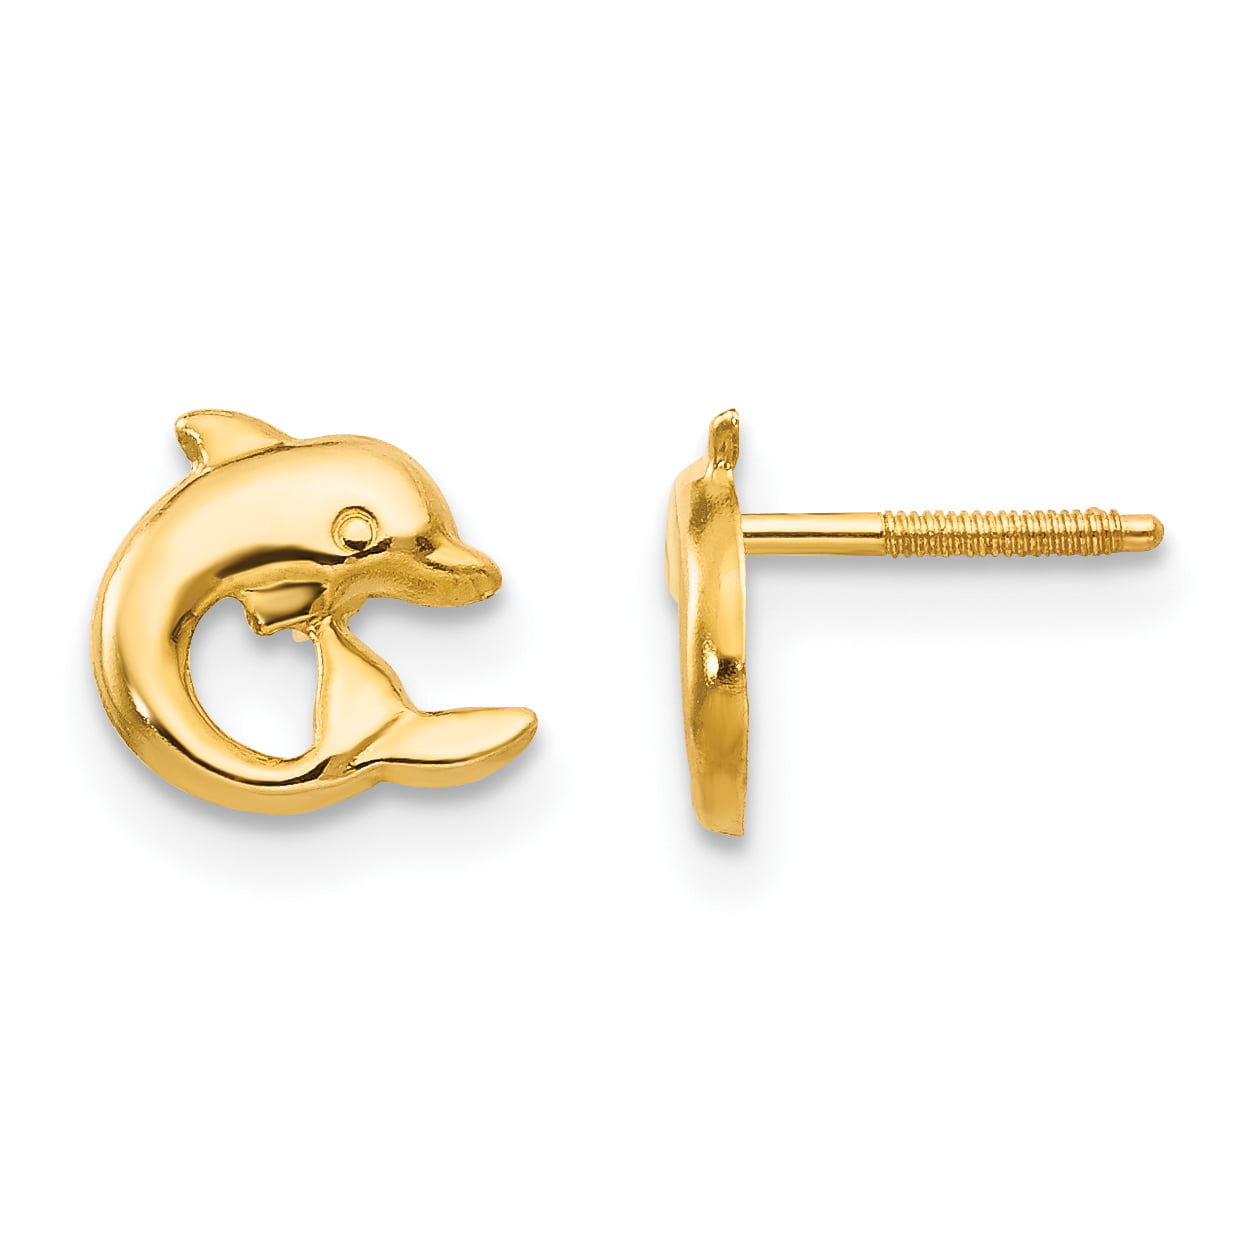 Madi K Childrens 14k Yellow Gold Polished Small Dolphin Screwback Post Earrings 